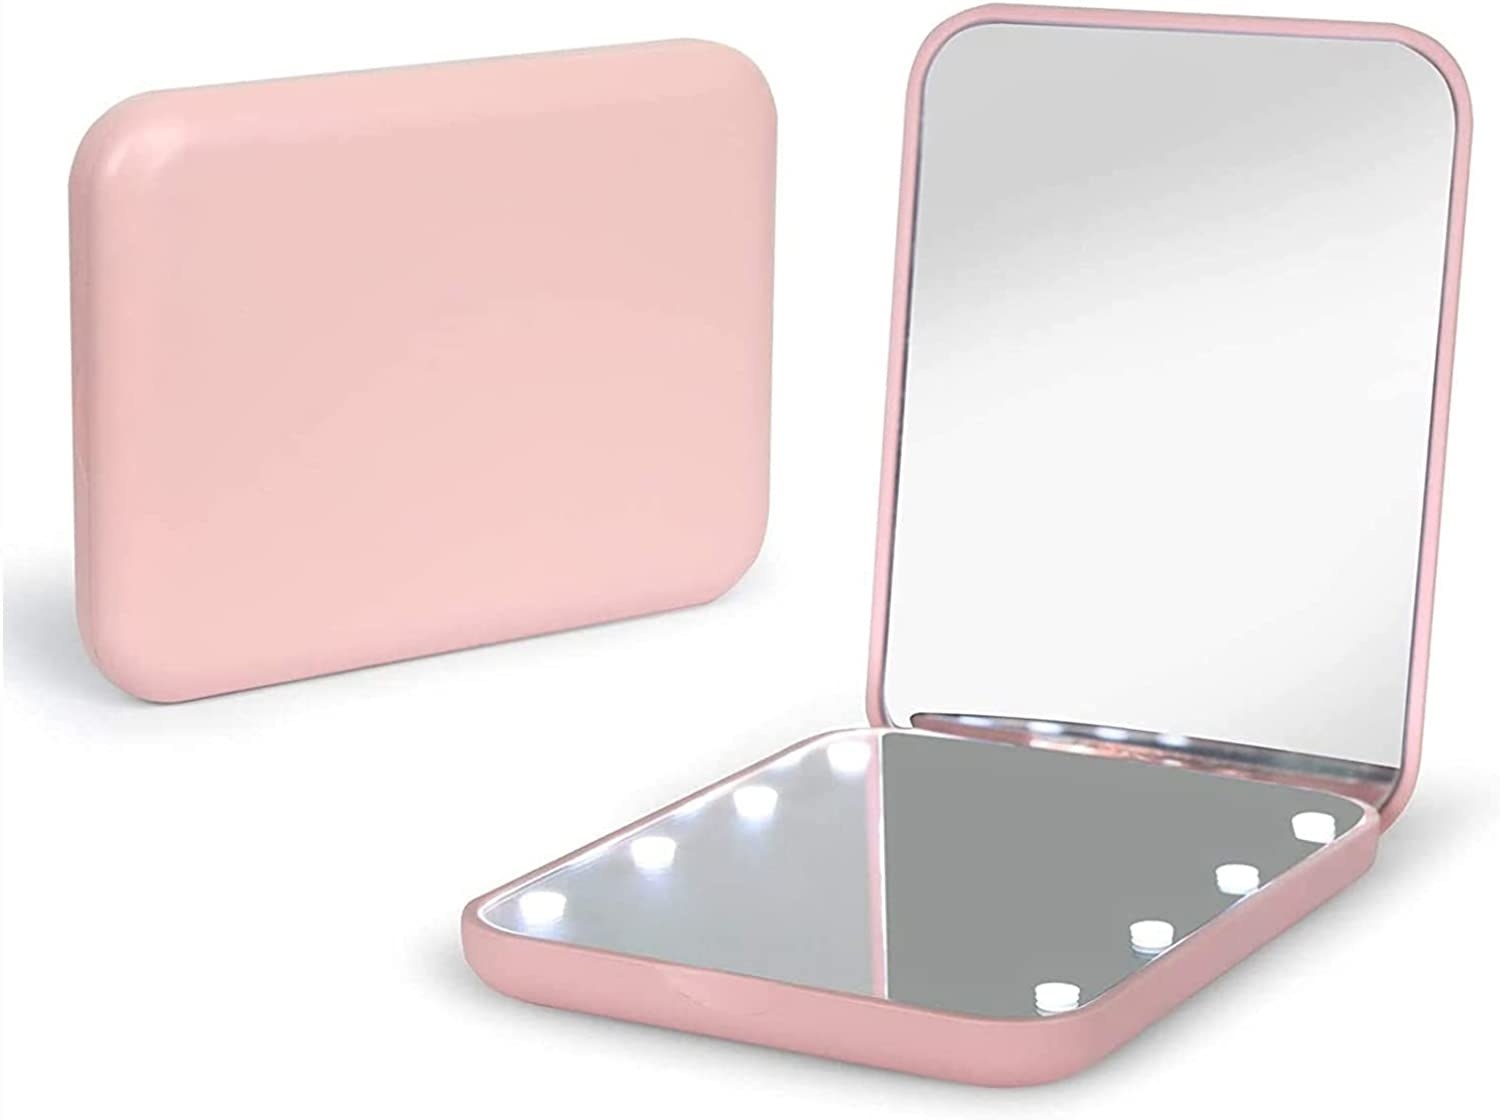 a light-up mirror shown folded and unfolded on a blank background